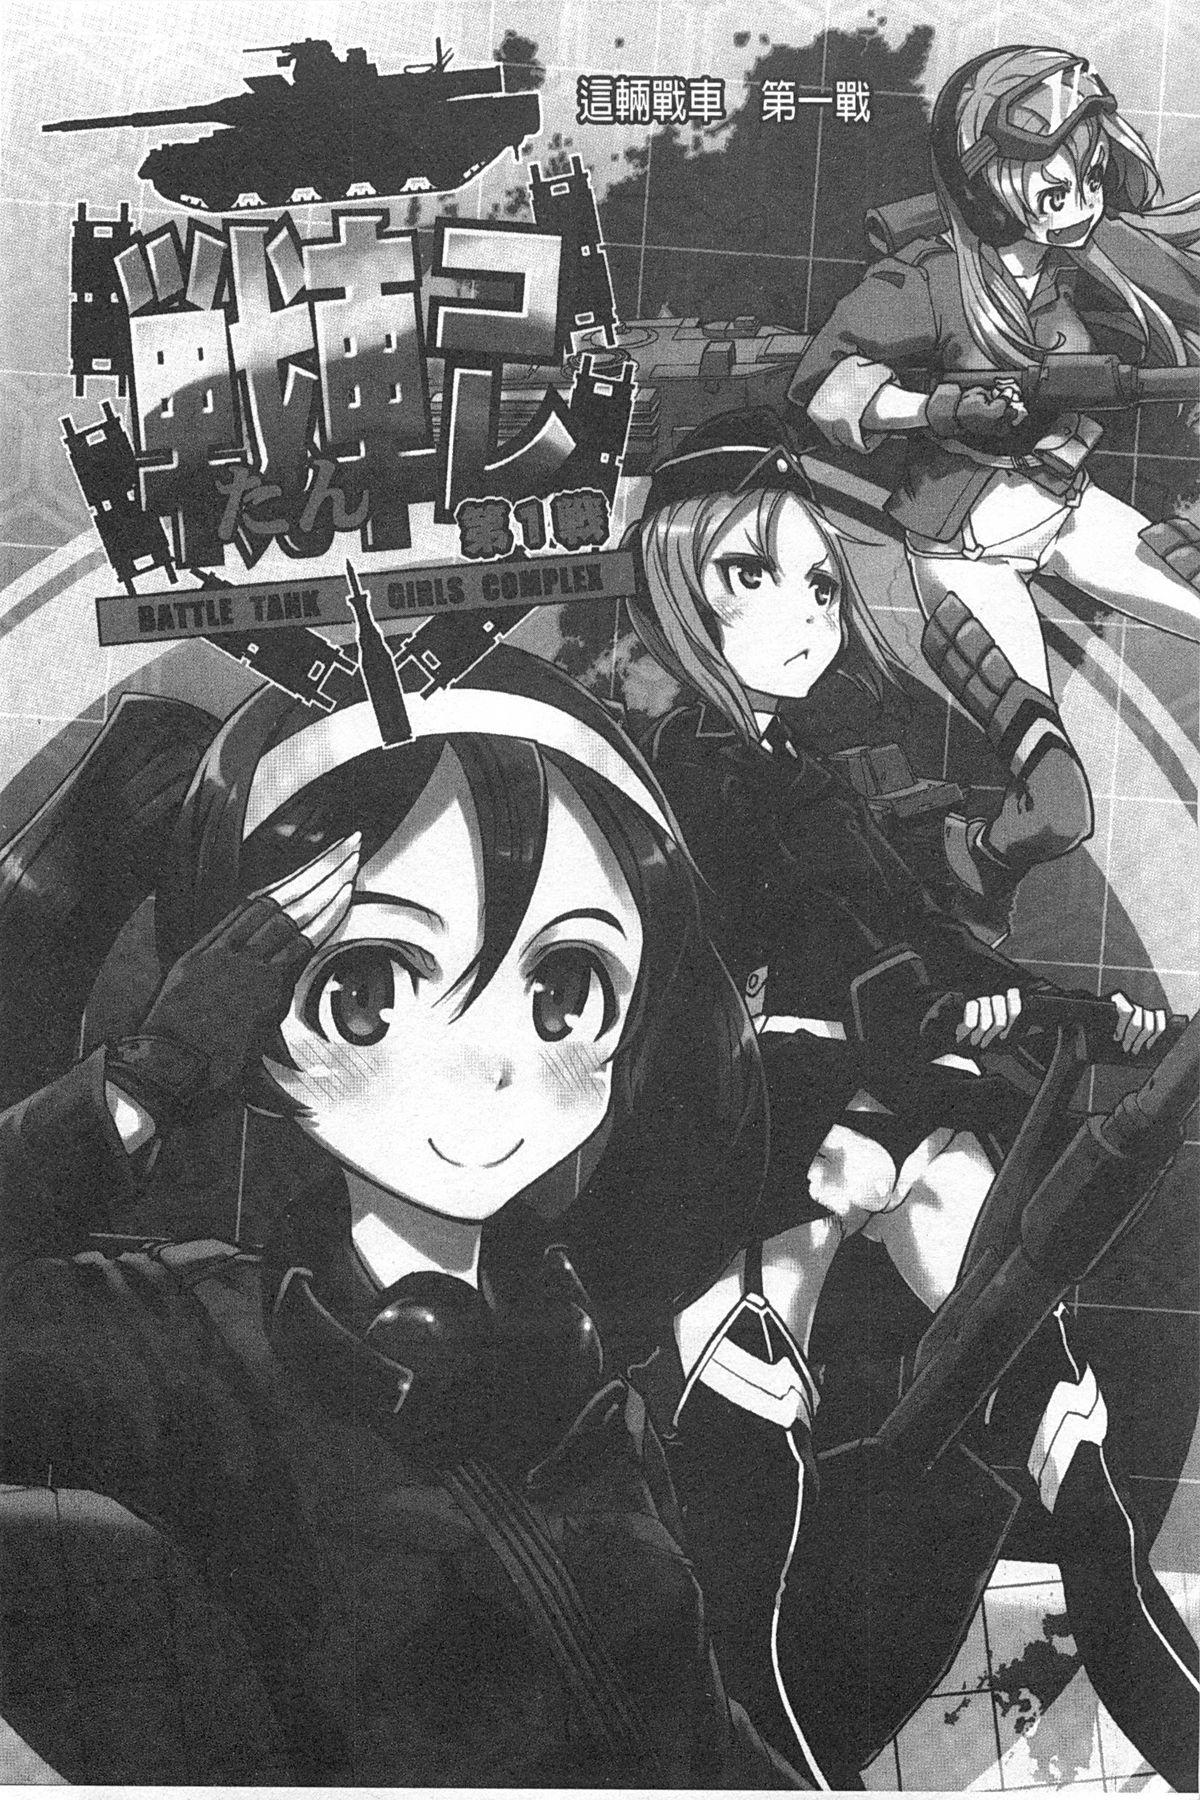 Cogiendo Tancolle - Battle Tank Girls Complex | TAN COLLE戰車收藏 Flagra - Page 6